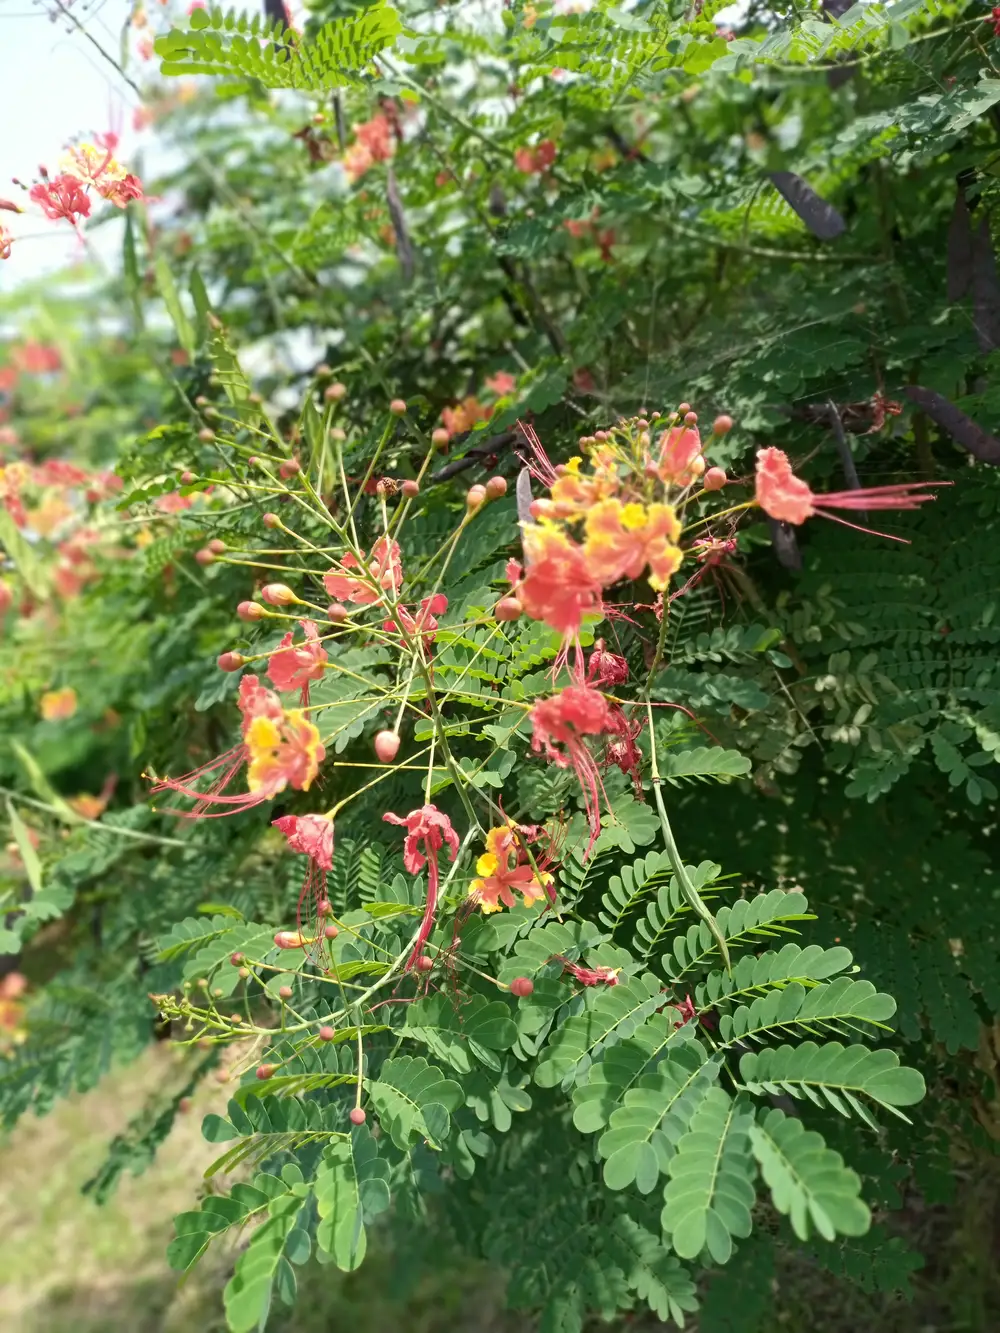 Flowers on a Plant